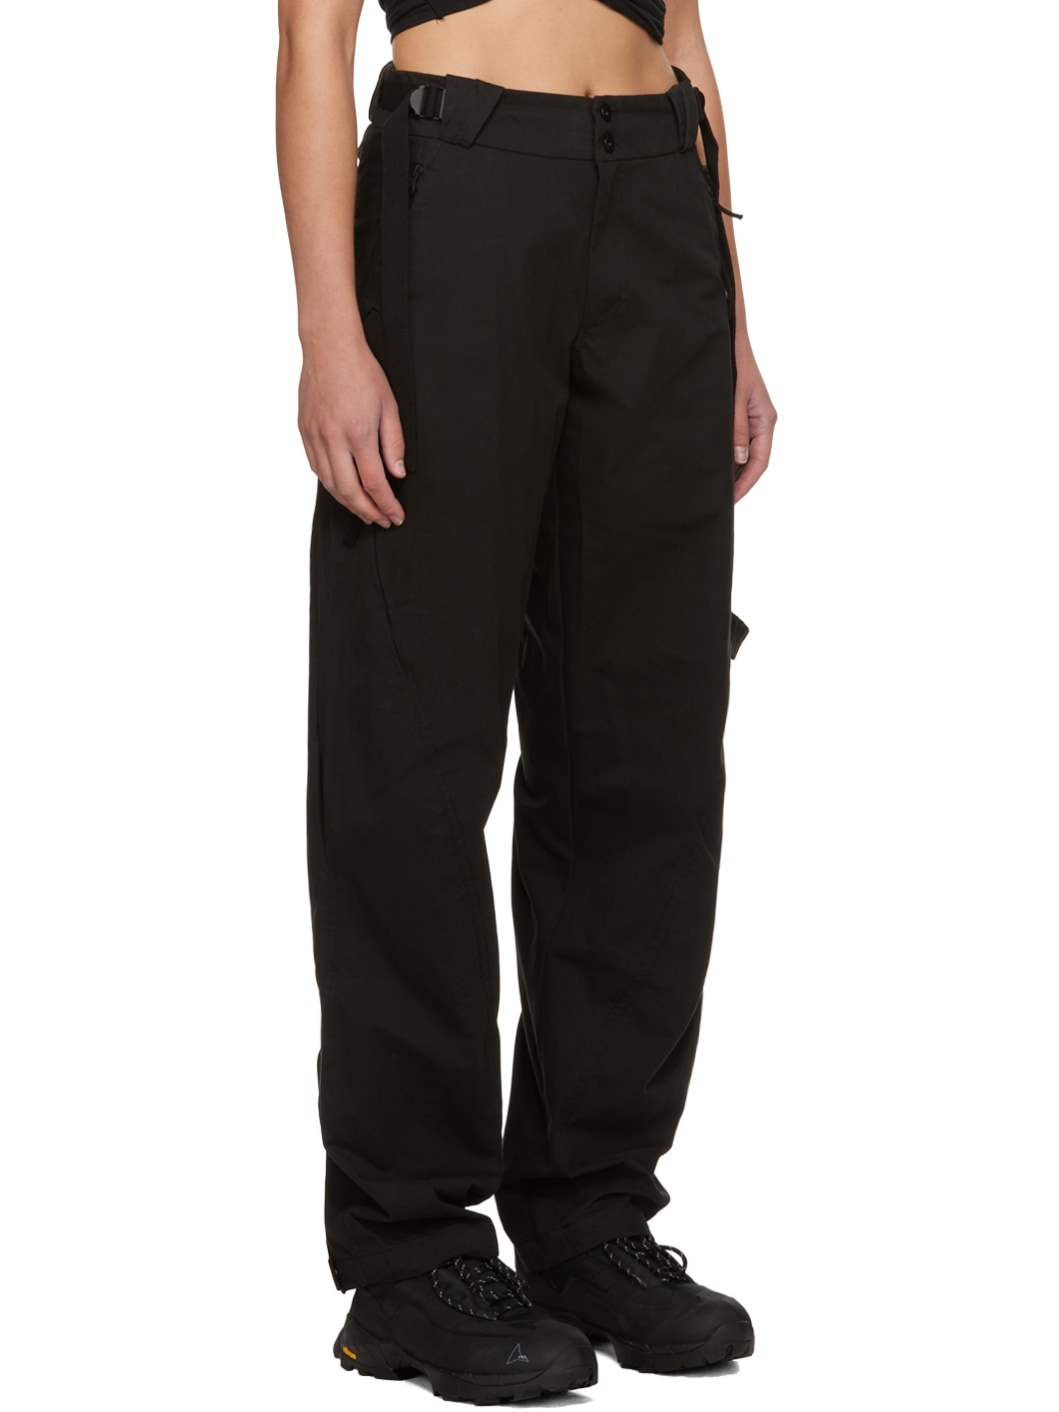 Black Vented Trousers - 2